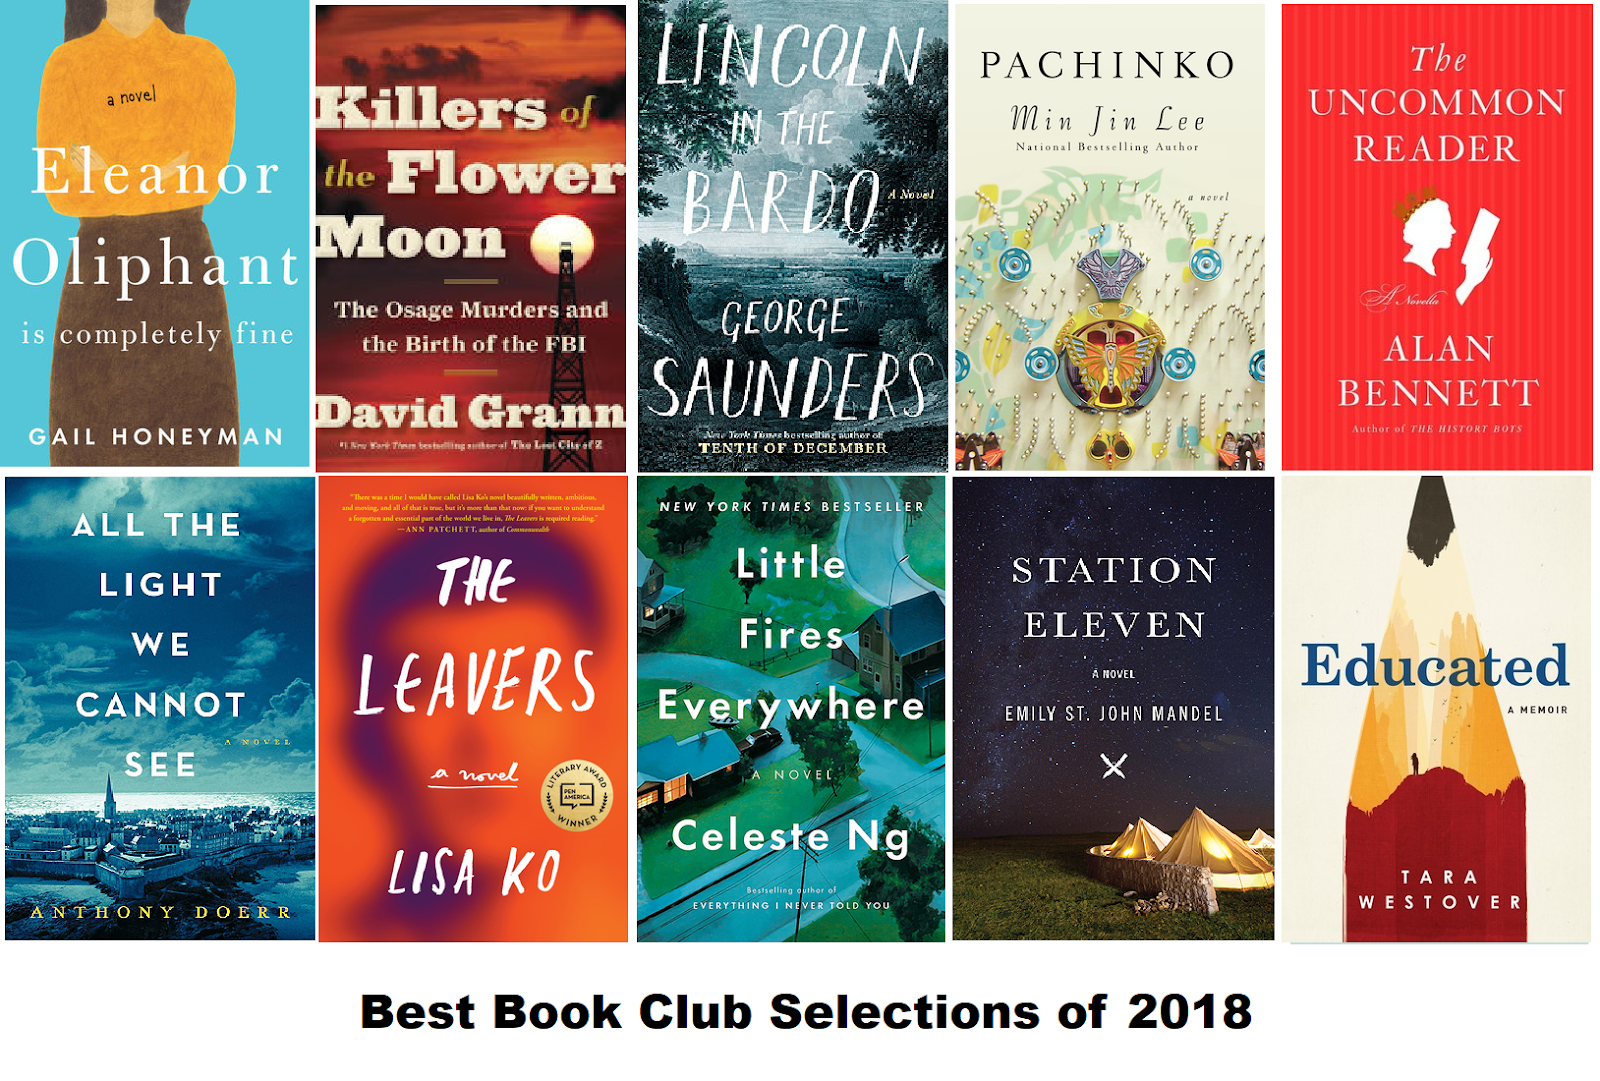 My Head Is Full of Books: Best Book Club Selections of 2018